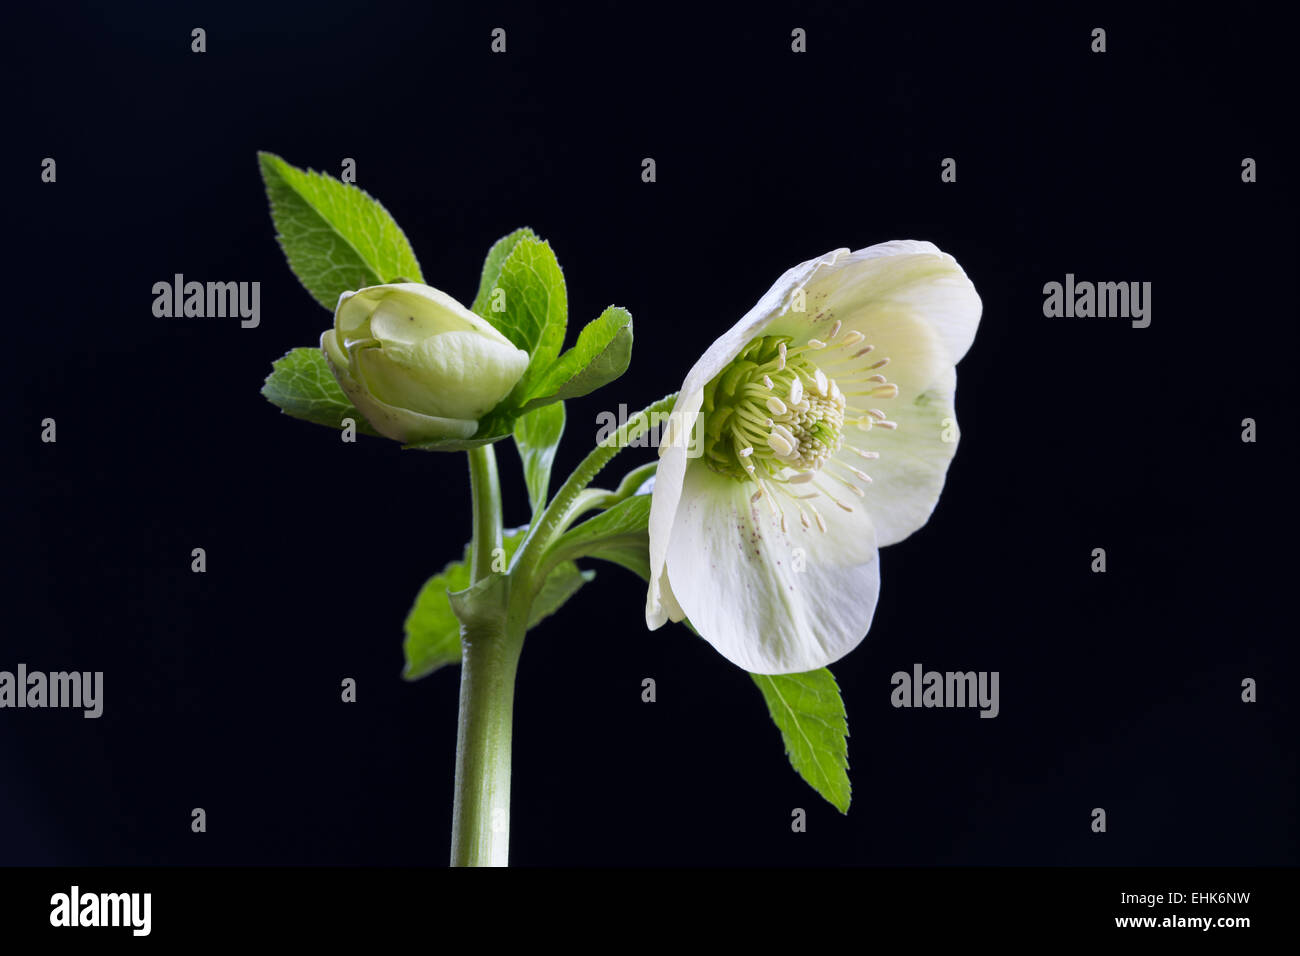 Hellebore orientalis flower and bud with a black background Stock Photo